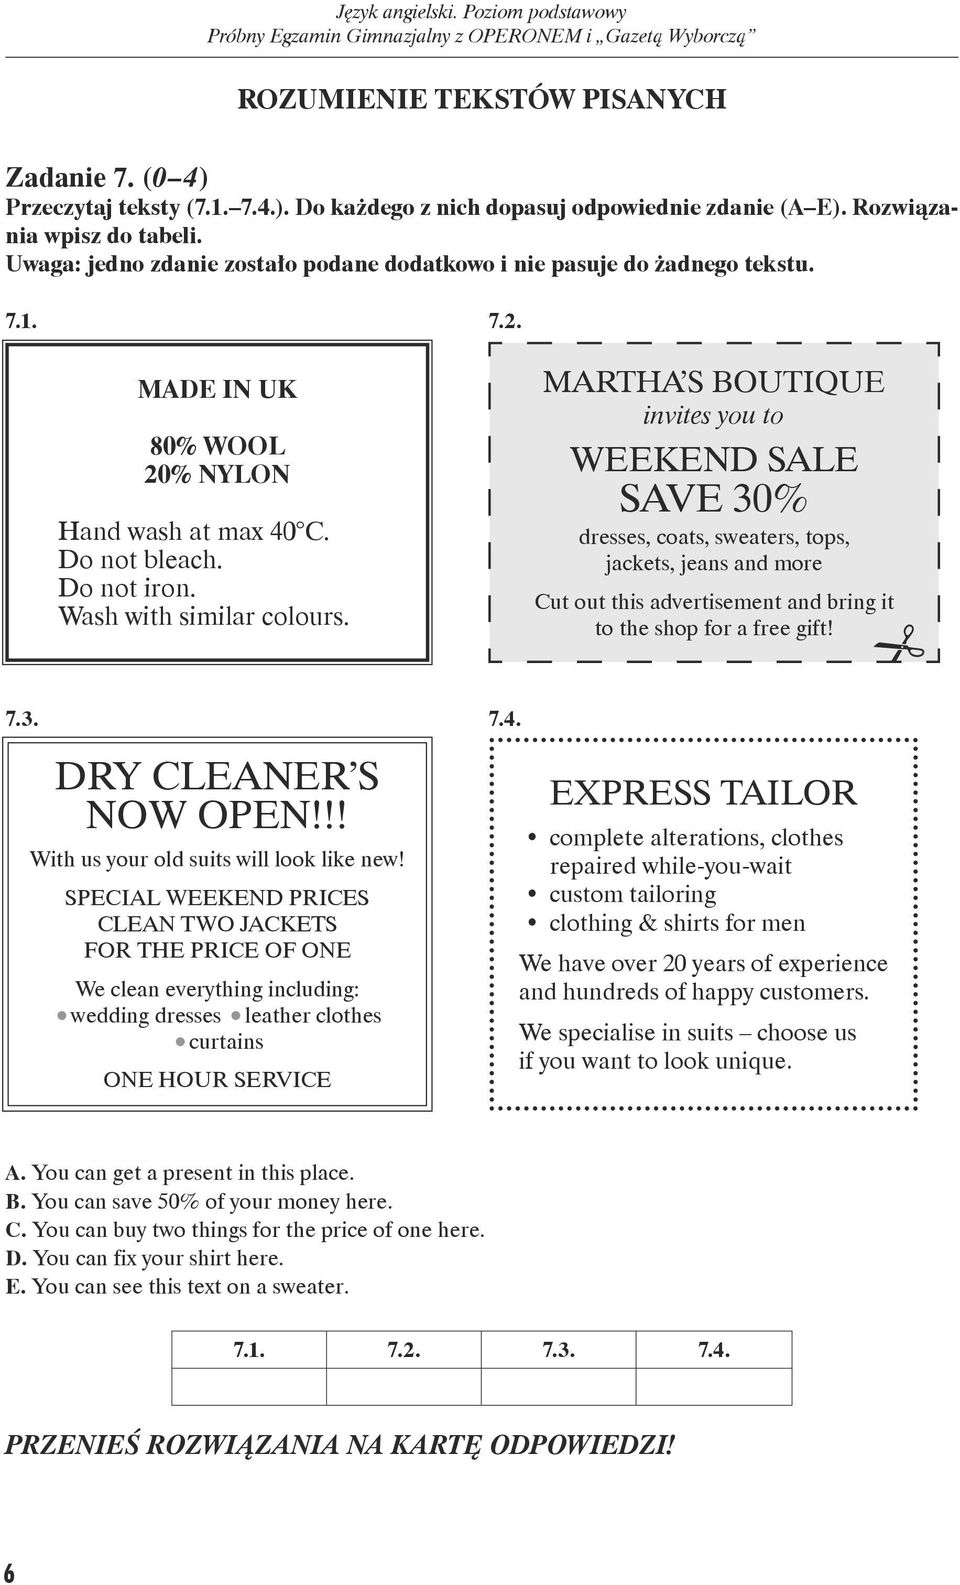 MARTHA S BOUTIQUE invites you to WEEKEND SALE SAVE 30% dresses, coats, sweaters, tops, jackets, jeans and more Cut out this advertisement and bring it to the shop for a free gift! 7.3. DRY CLEANER S NOW OPEN!